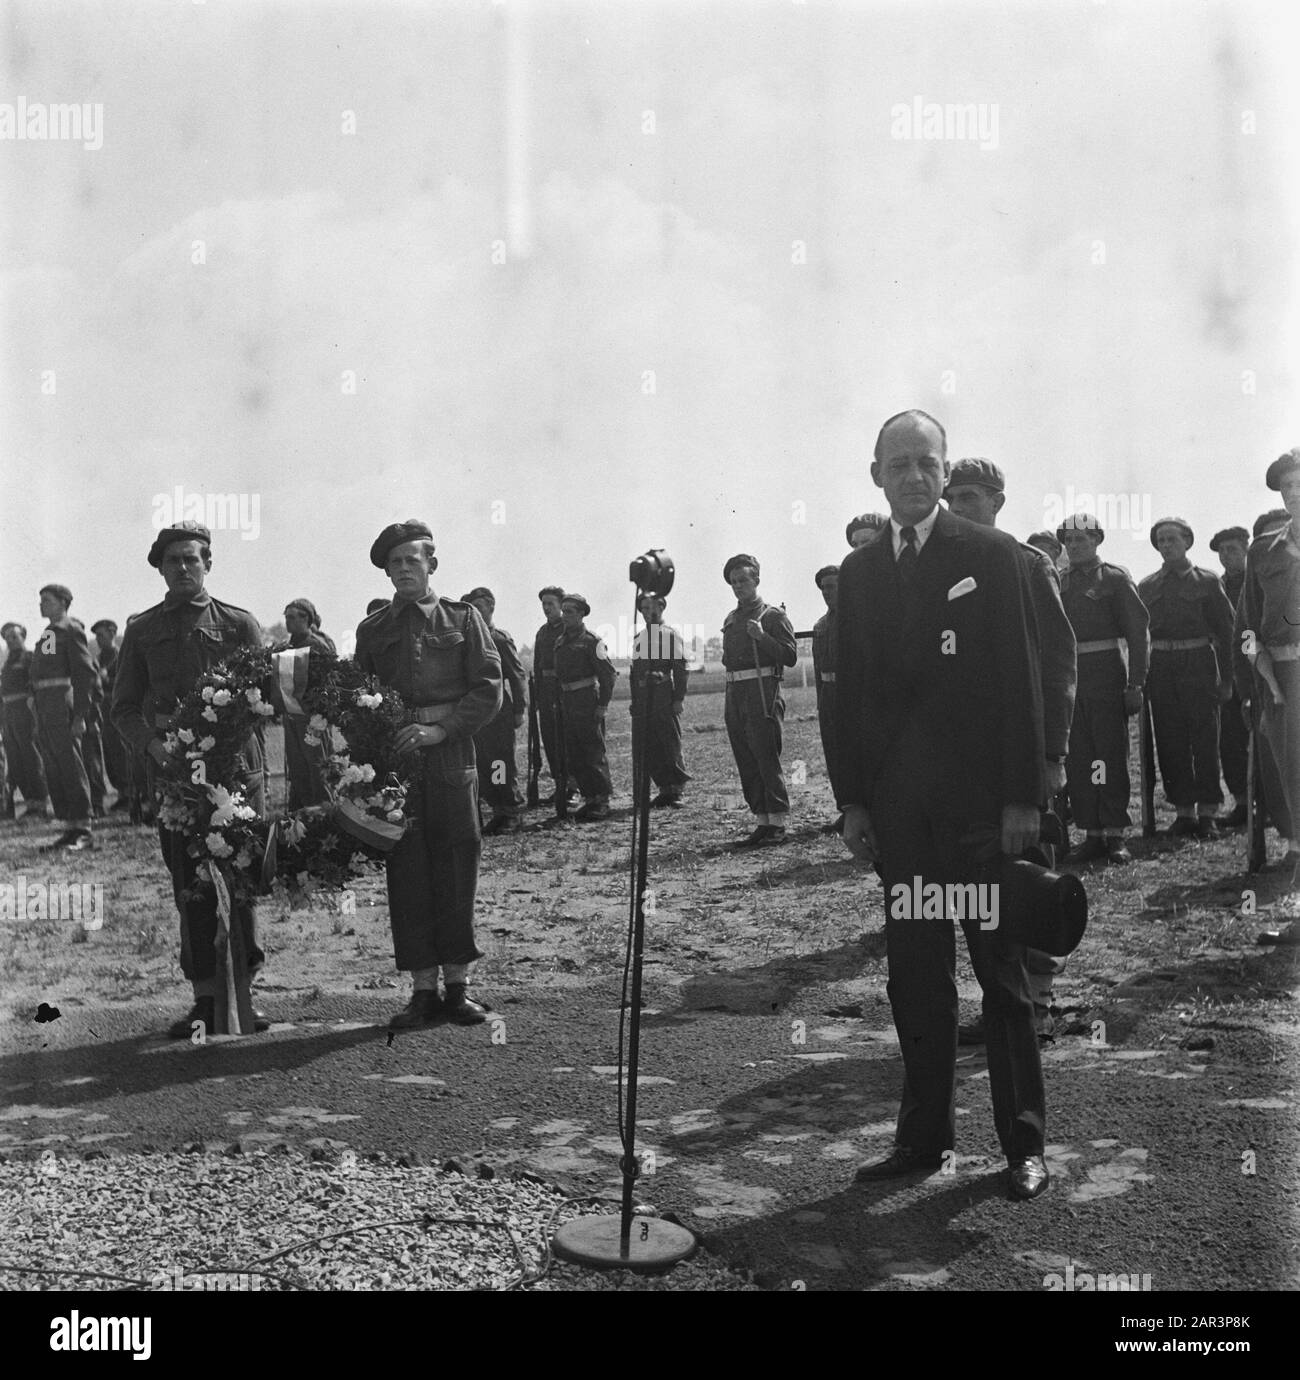 Liberation Festivals: Son (Noord-Brabant)  Wreath laying at the American cemetery in Son (Noord-Brabant) on the American Independence Day [Independence Day] by Minister of War J. Meynen Date: 4 July 1945 Location: Noord-Brabant, Son en Breugel Keywords: cemeteries, wreaths, soldiers, ministers Personal name: Meynen, J. Stock Photo